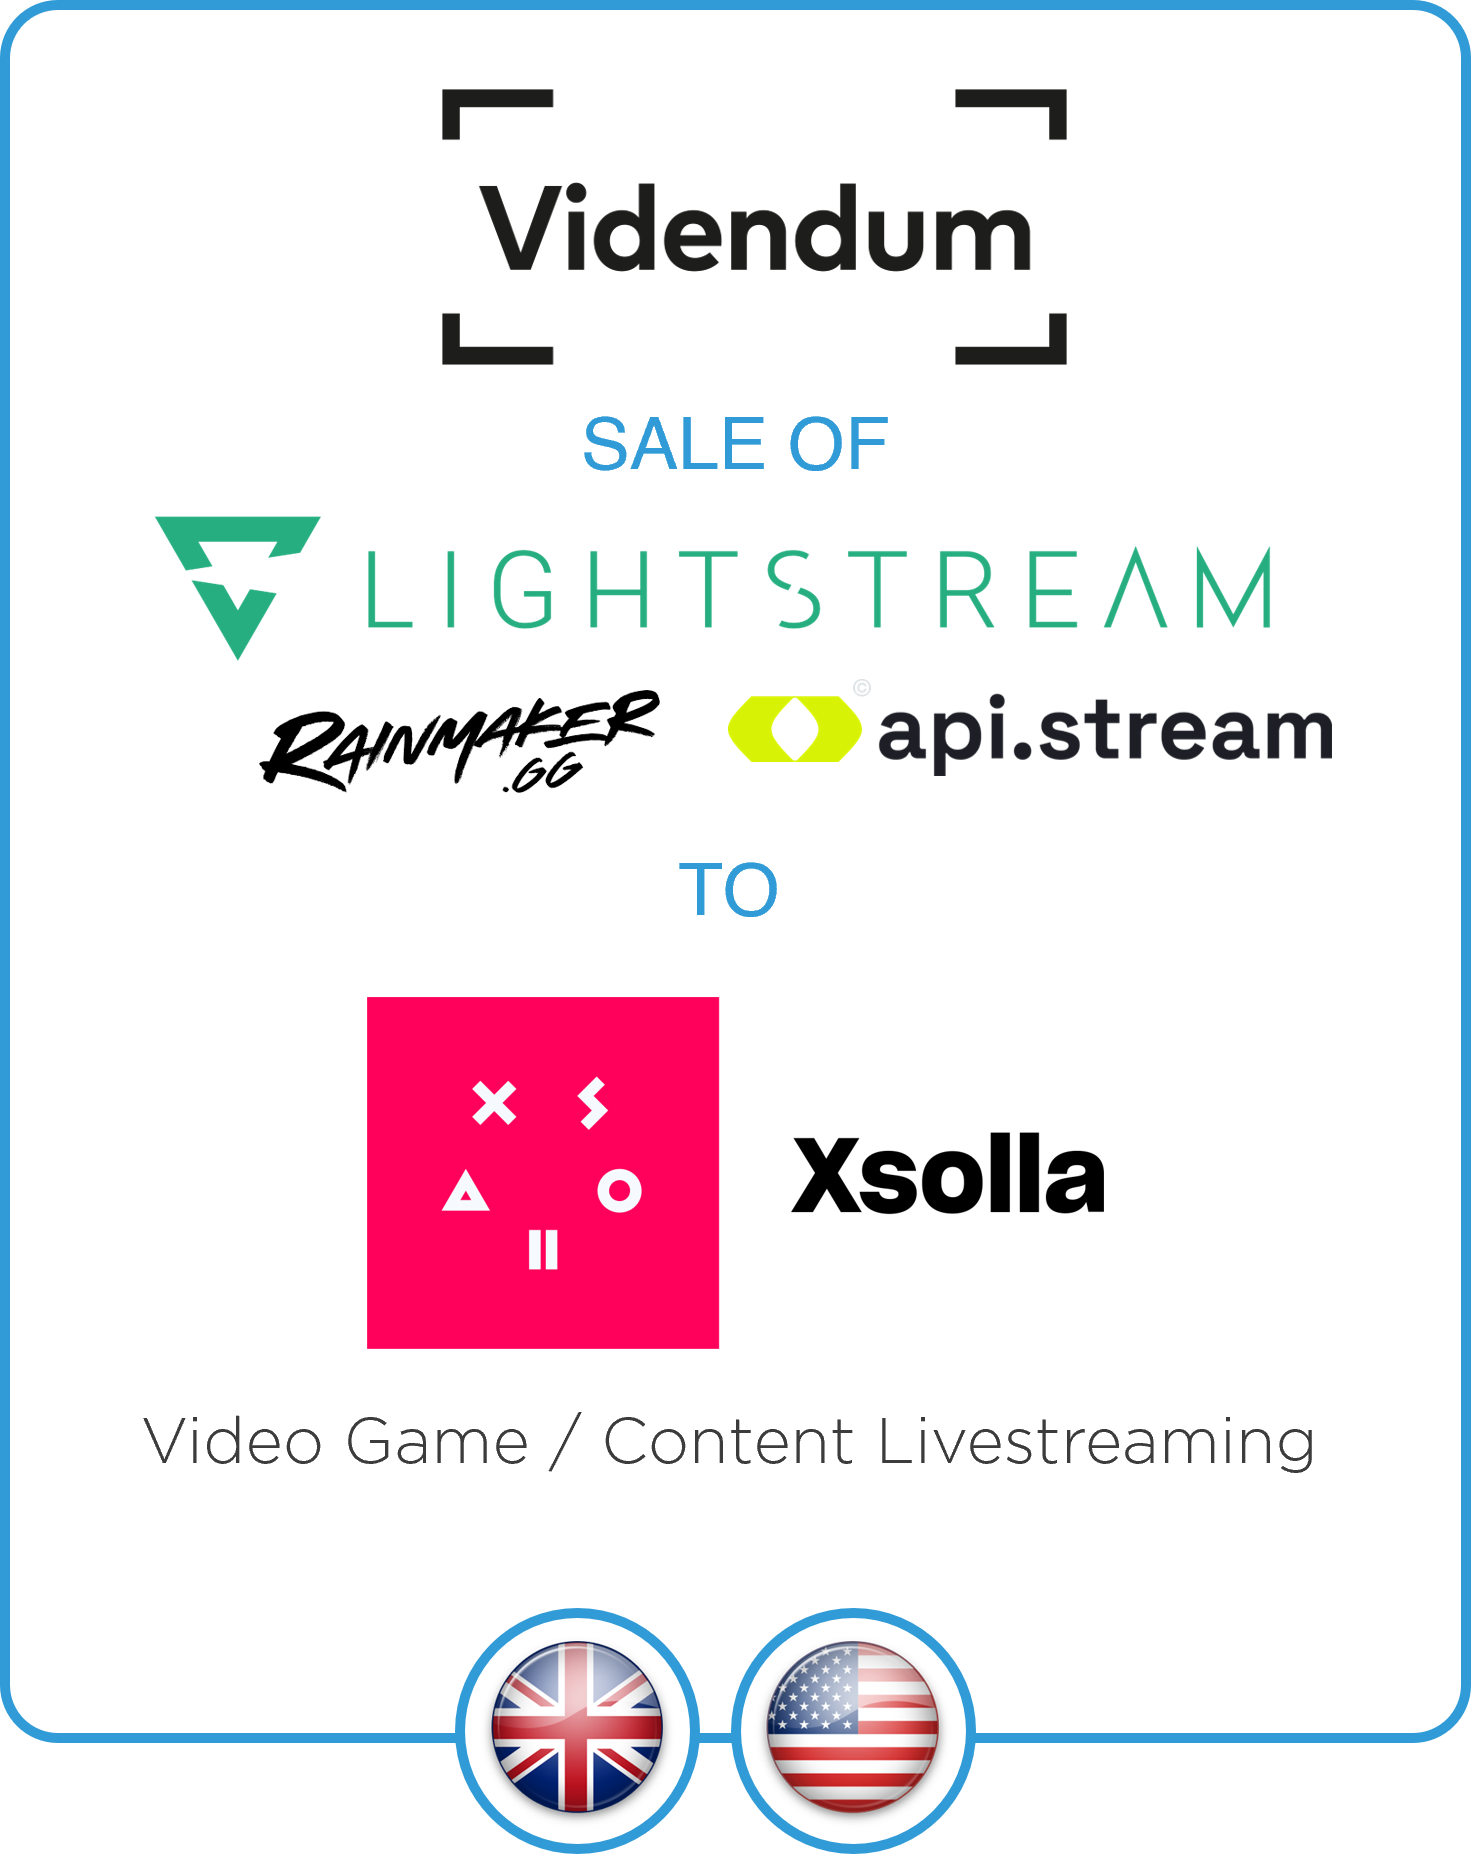 Drake Star Acts as Exclusive Financial Advisor to Videndum (LON:VID) on Sale of Lightstream, Rainmaker and API.stream to Xsolla